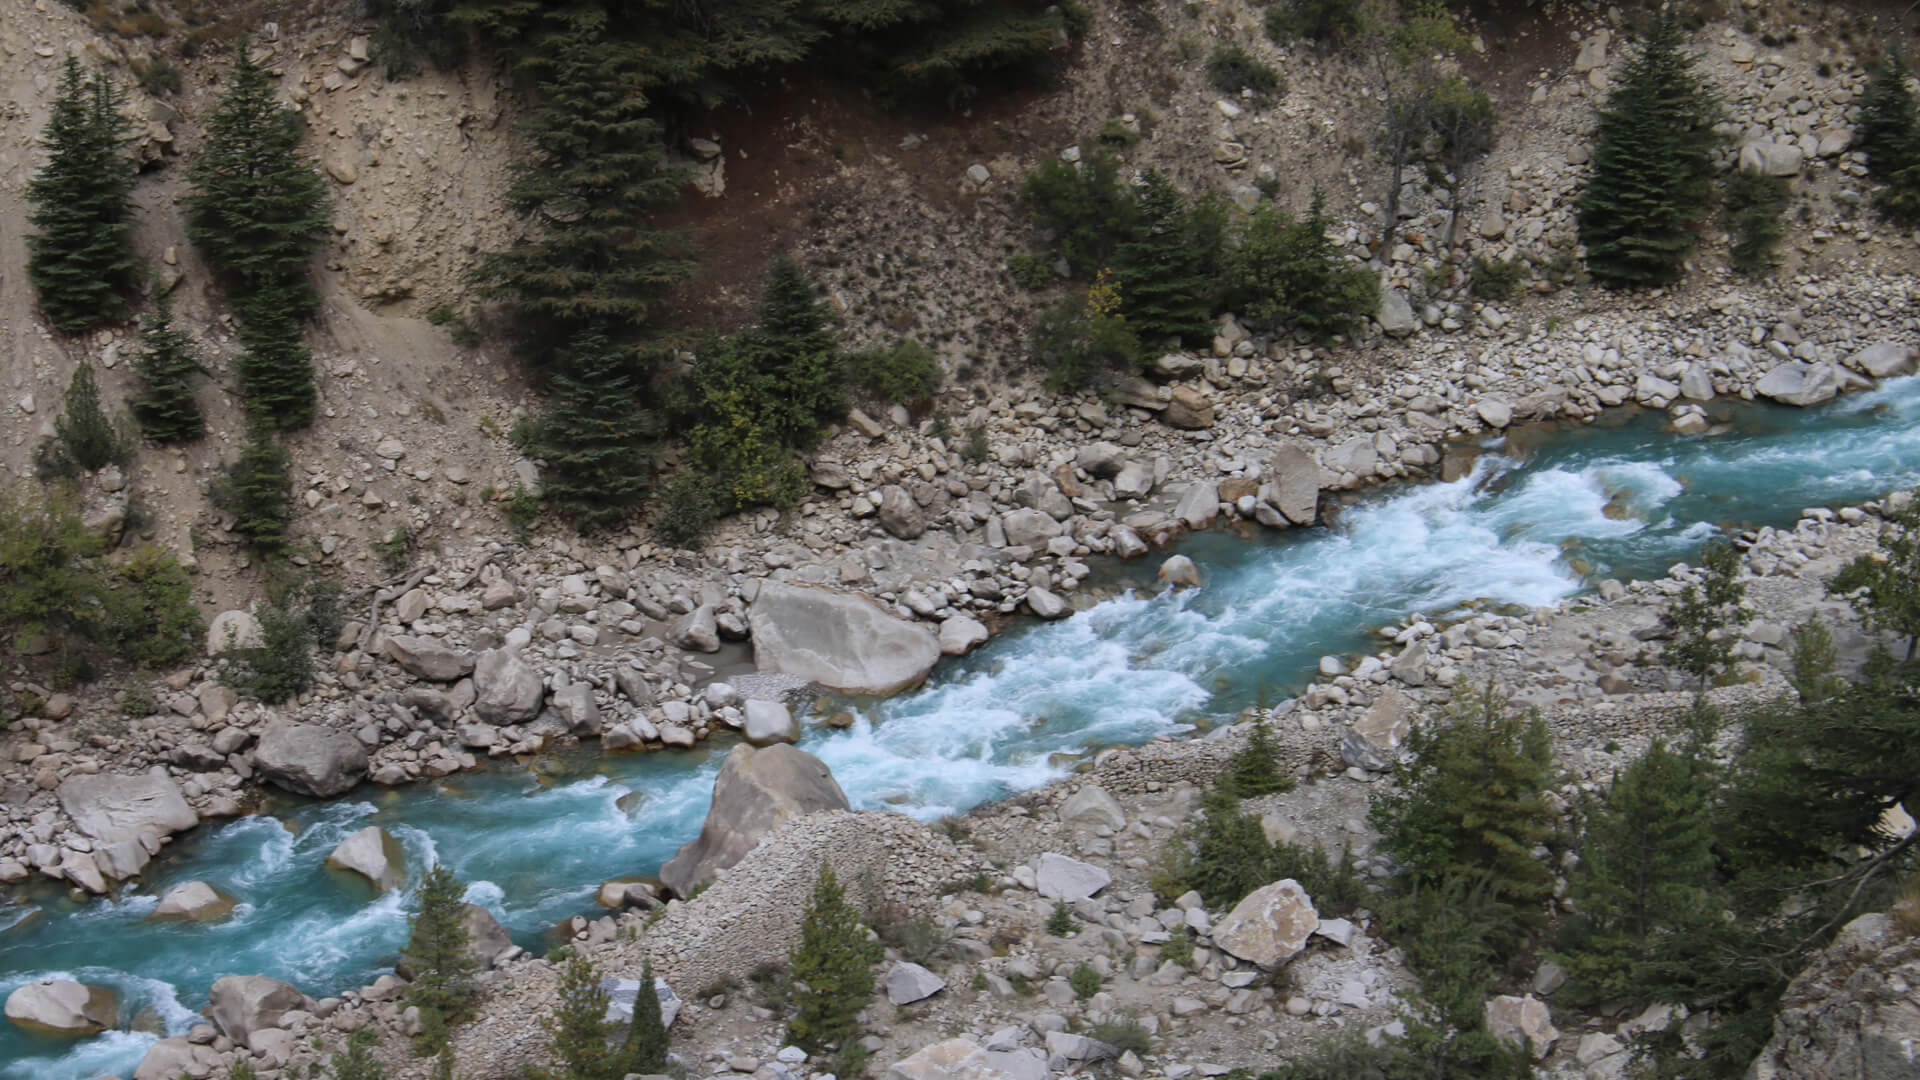 Nelong Valley - The Ladakh of Uttarakhand [All you want to know to visit]